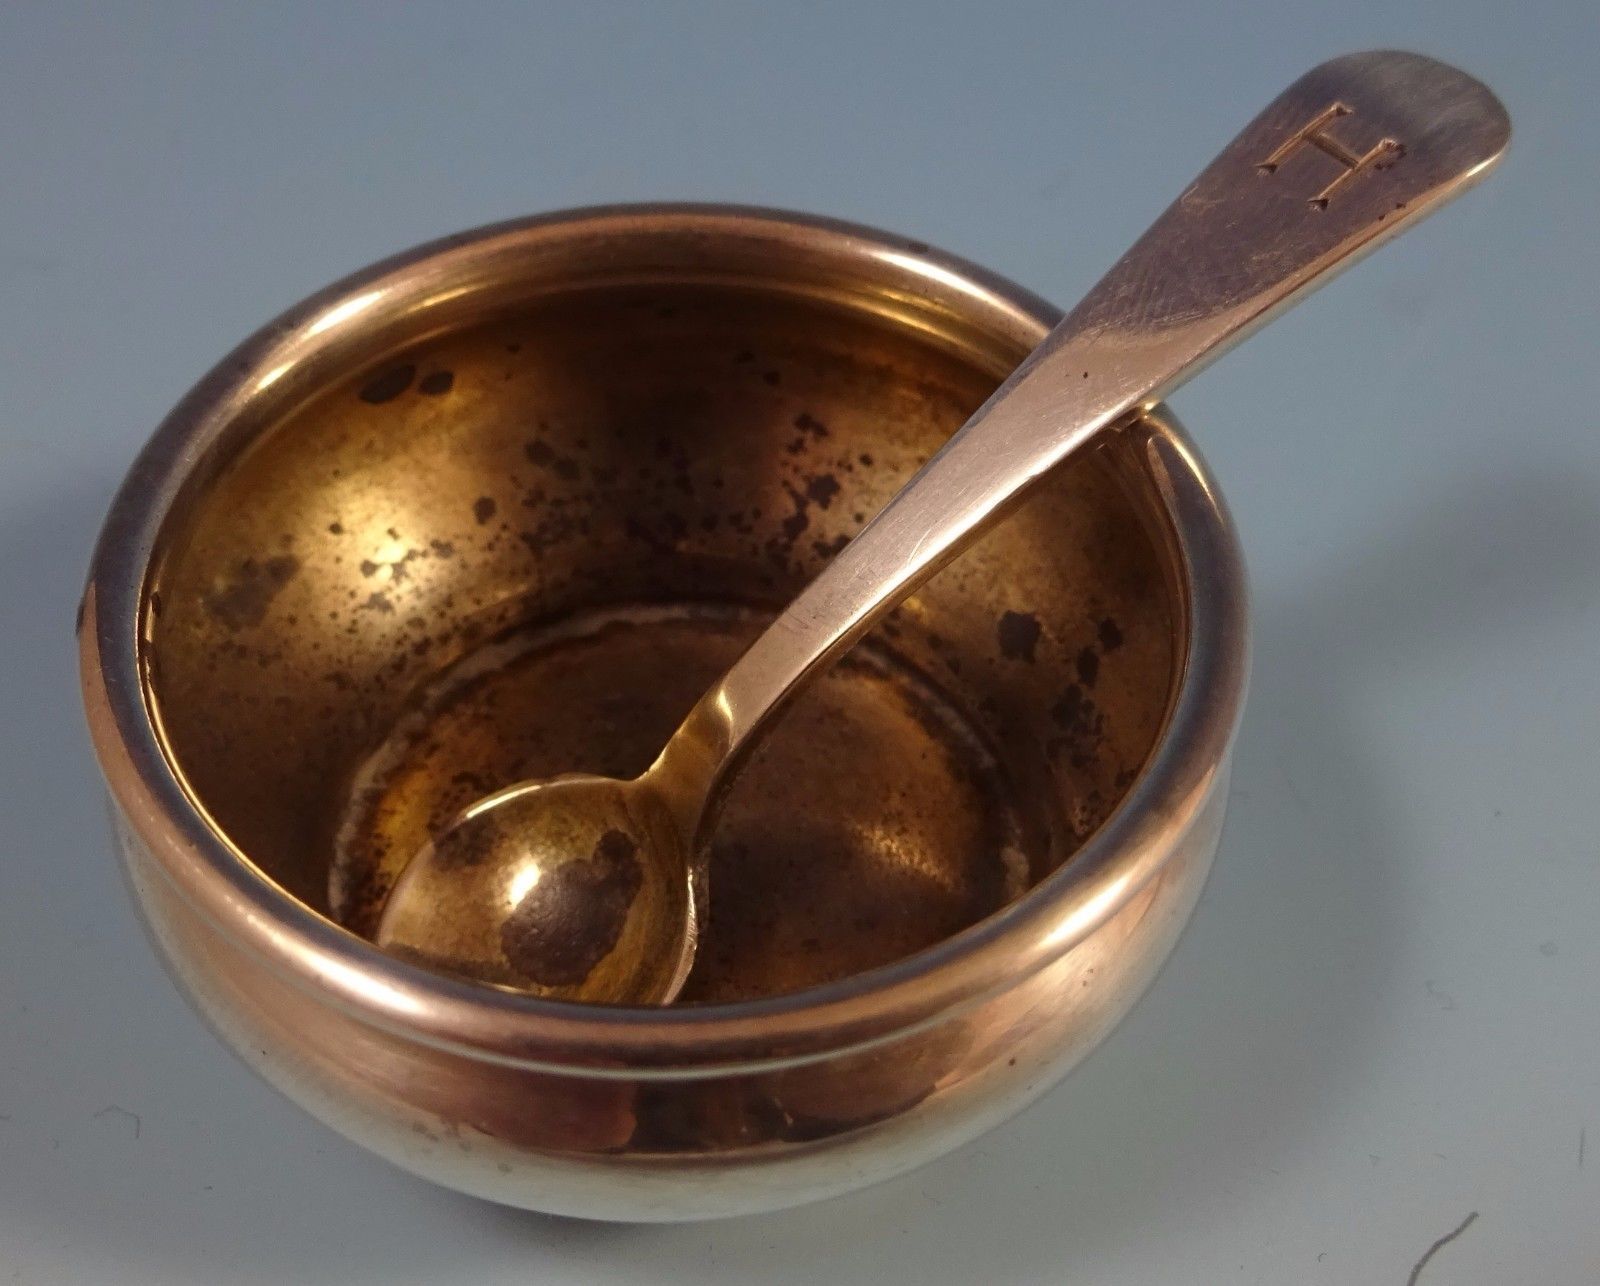 Primary image for Covington by Gorham Sterling Silver Salt Dip with Spoon #A4070 (#1426)